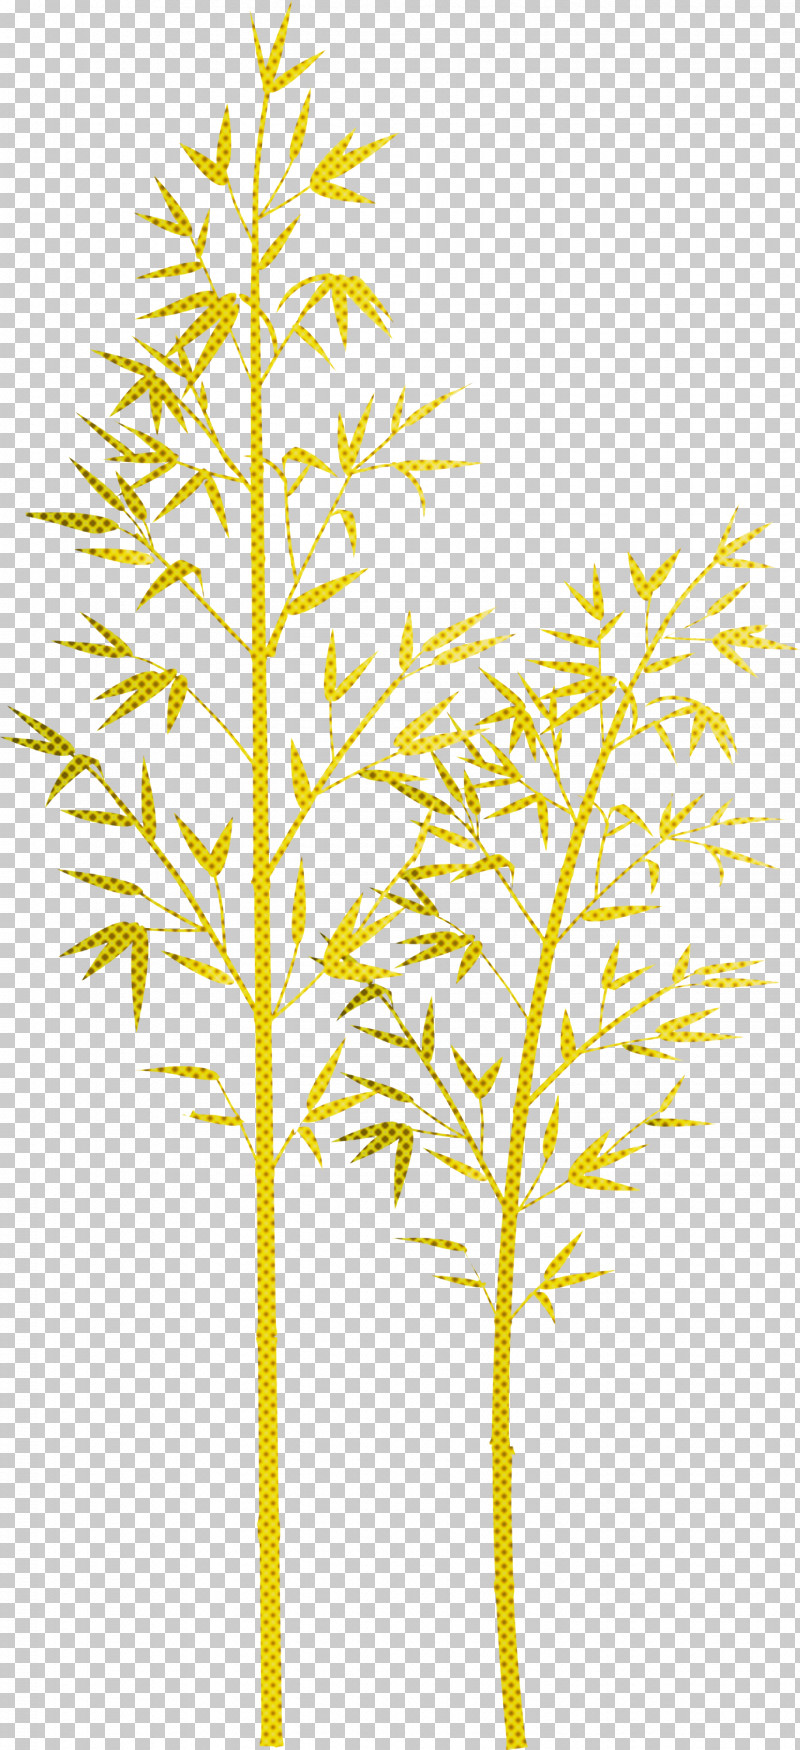 Bamboo Leaf PNG, Clipart, Bamboo, Flower, Grass, Grass Family, Leaf Free PNG Download